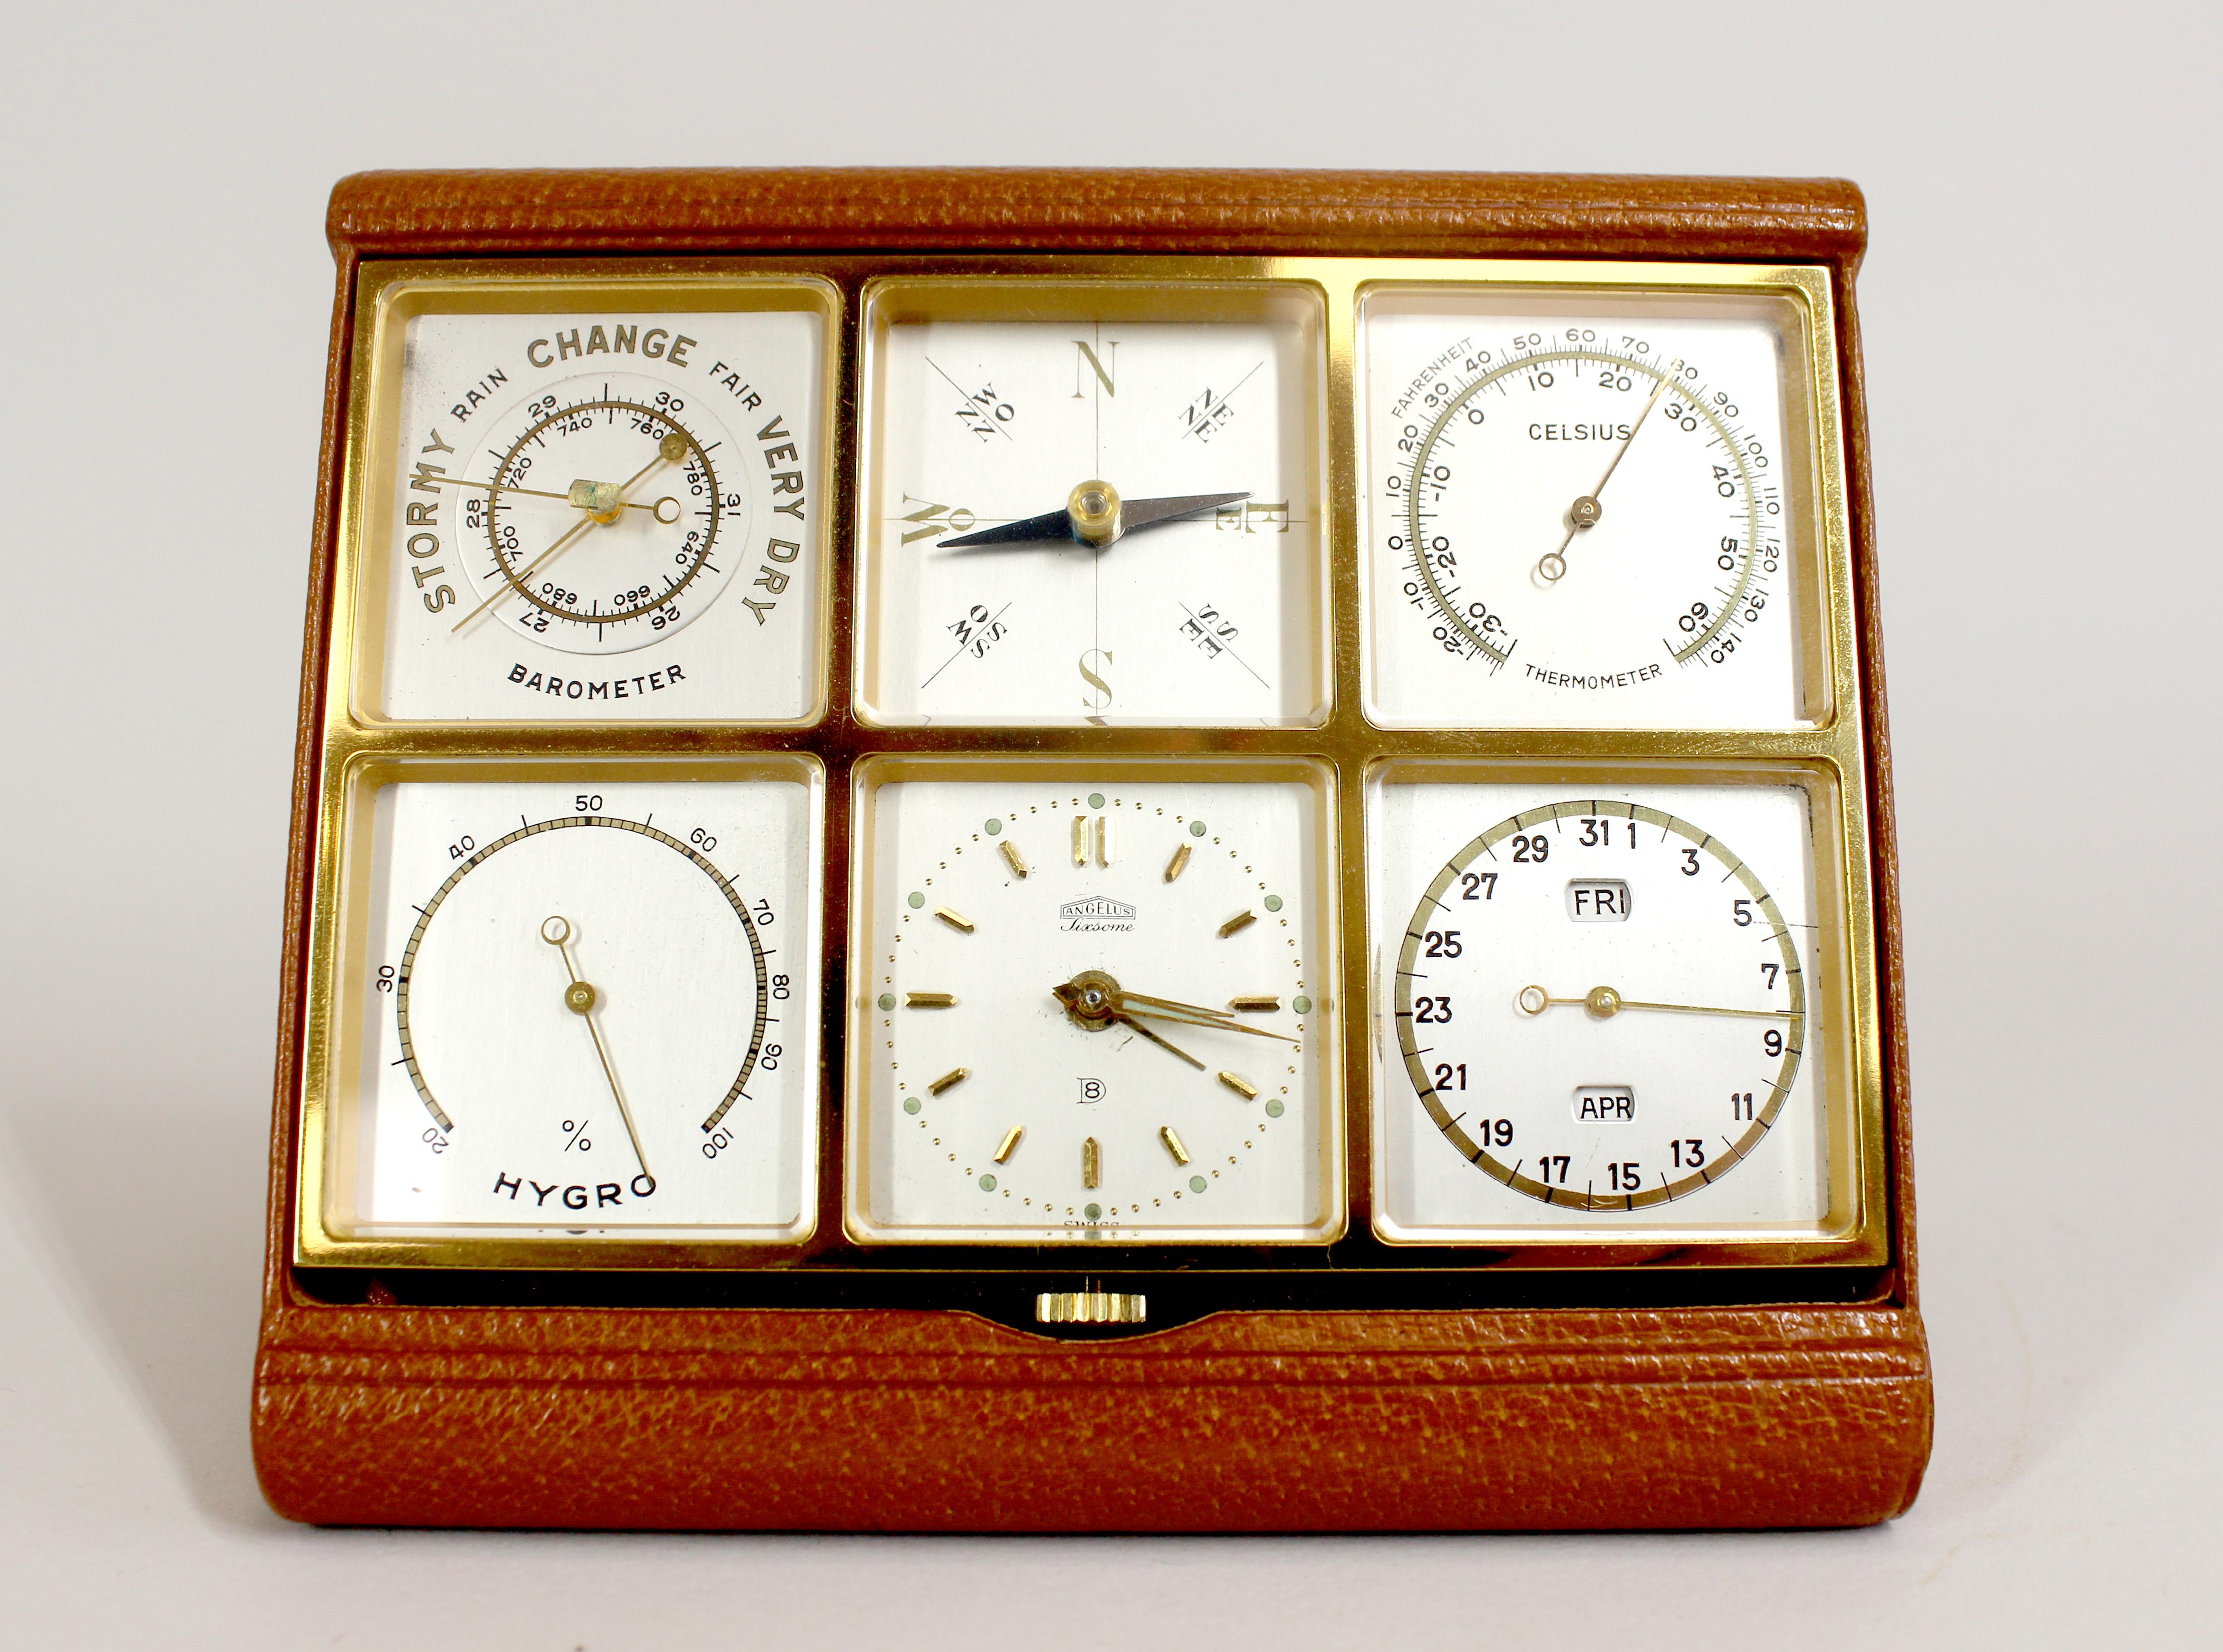 An extremely rare Angelus Sixsome eight day travelling alarm clock and desk compendium. Containing an eight day running alarm clock, with full Calendar, Barometer, Hygrometer, thermometer and compass. Housed in a an immaculate gilded panel, all